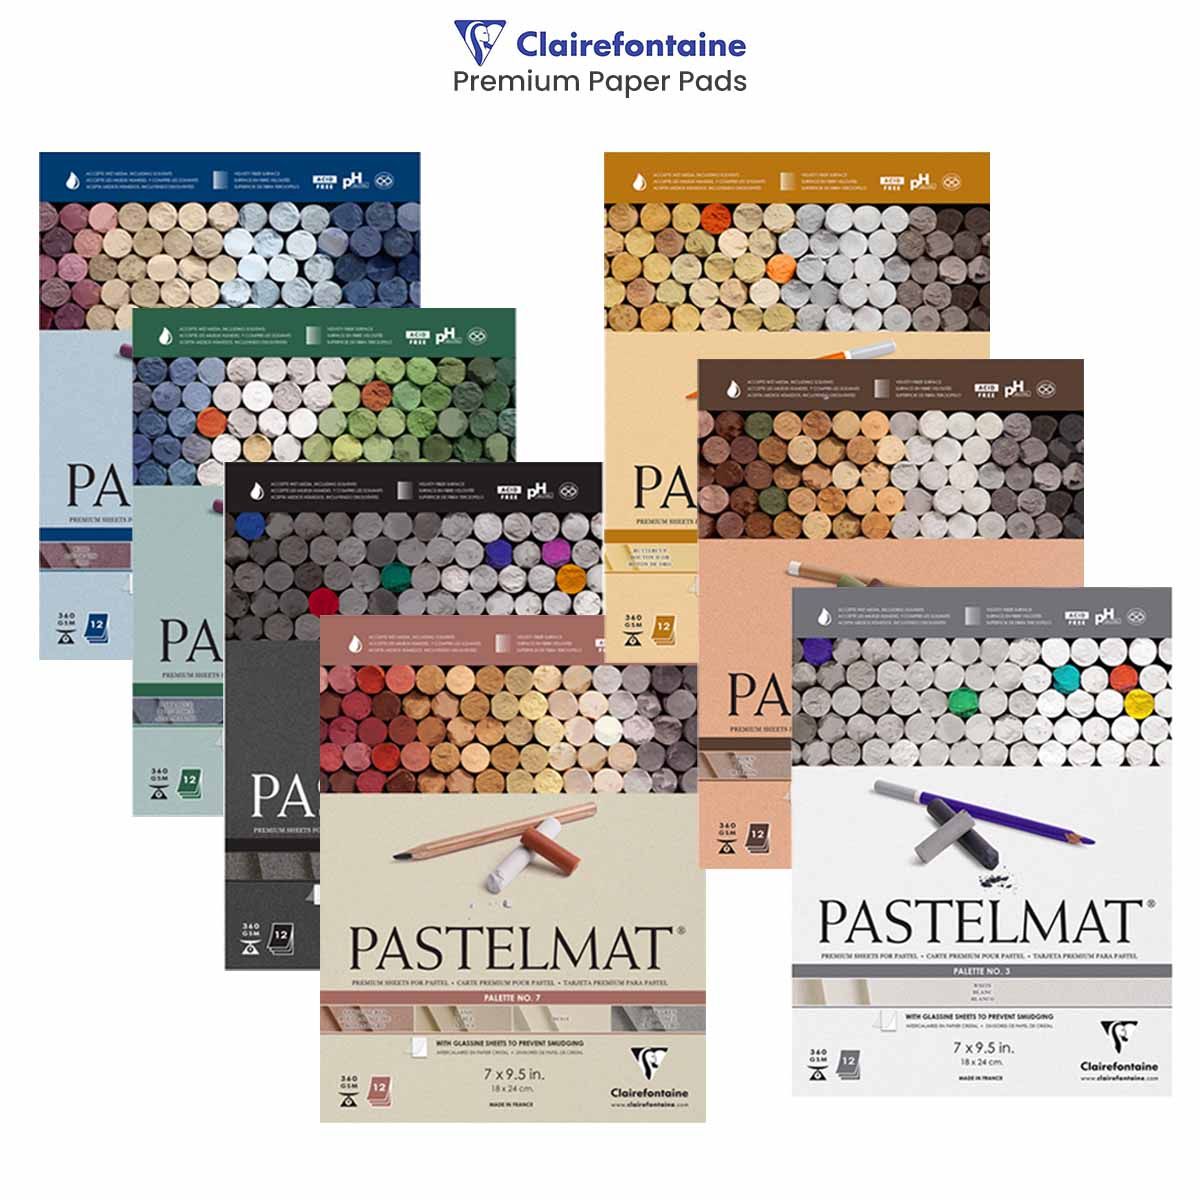 Clairefontaine Pastelmat Glued Pad - Palette No. 6 - (7 x 9 1/2 Inches) 18  x 24 cm - 360g - 12 Sheets - Charcoal Grey